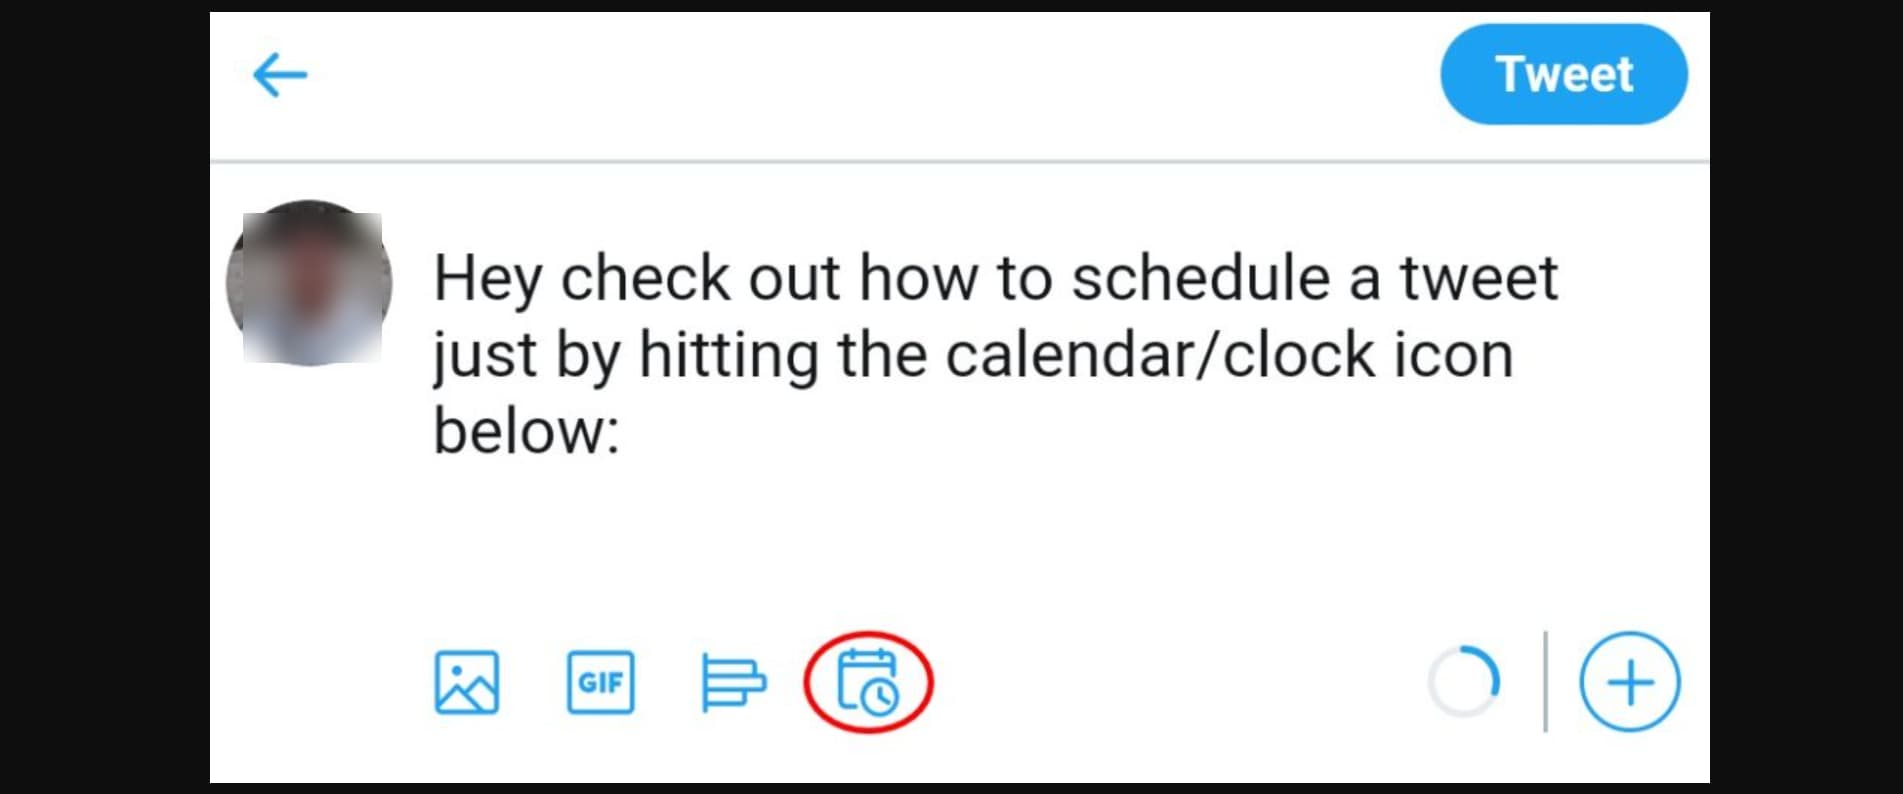 how to schedule tweets on Twitter mobile: calendar icon